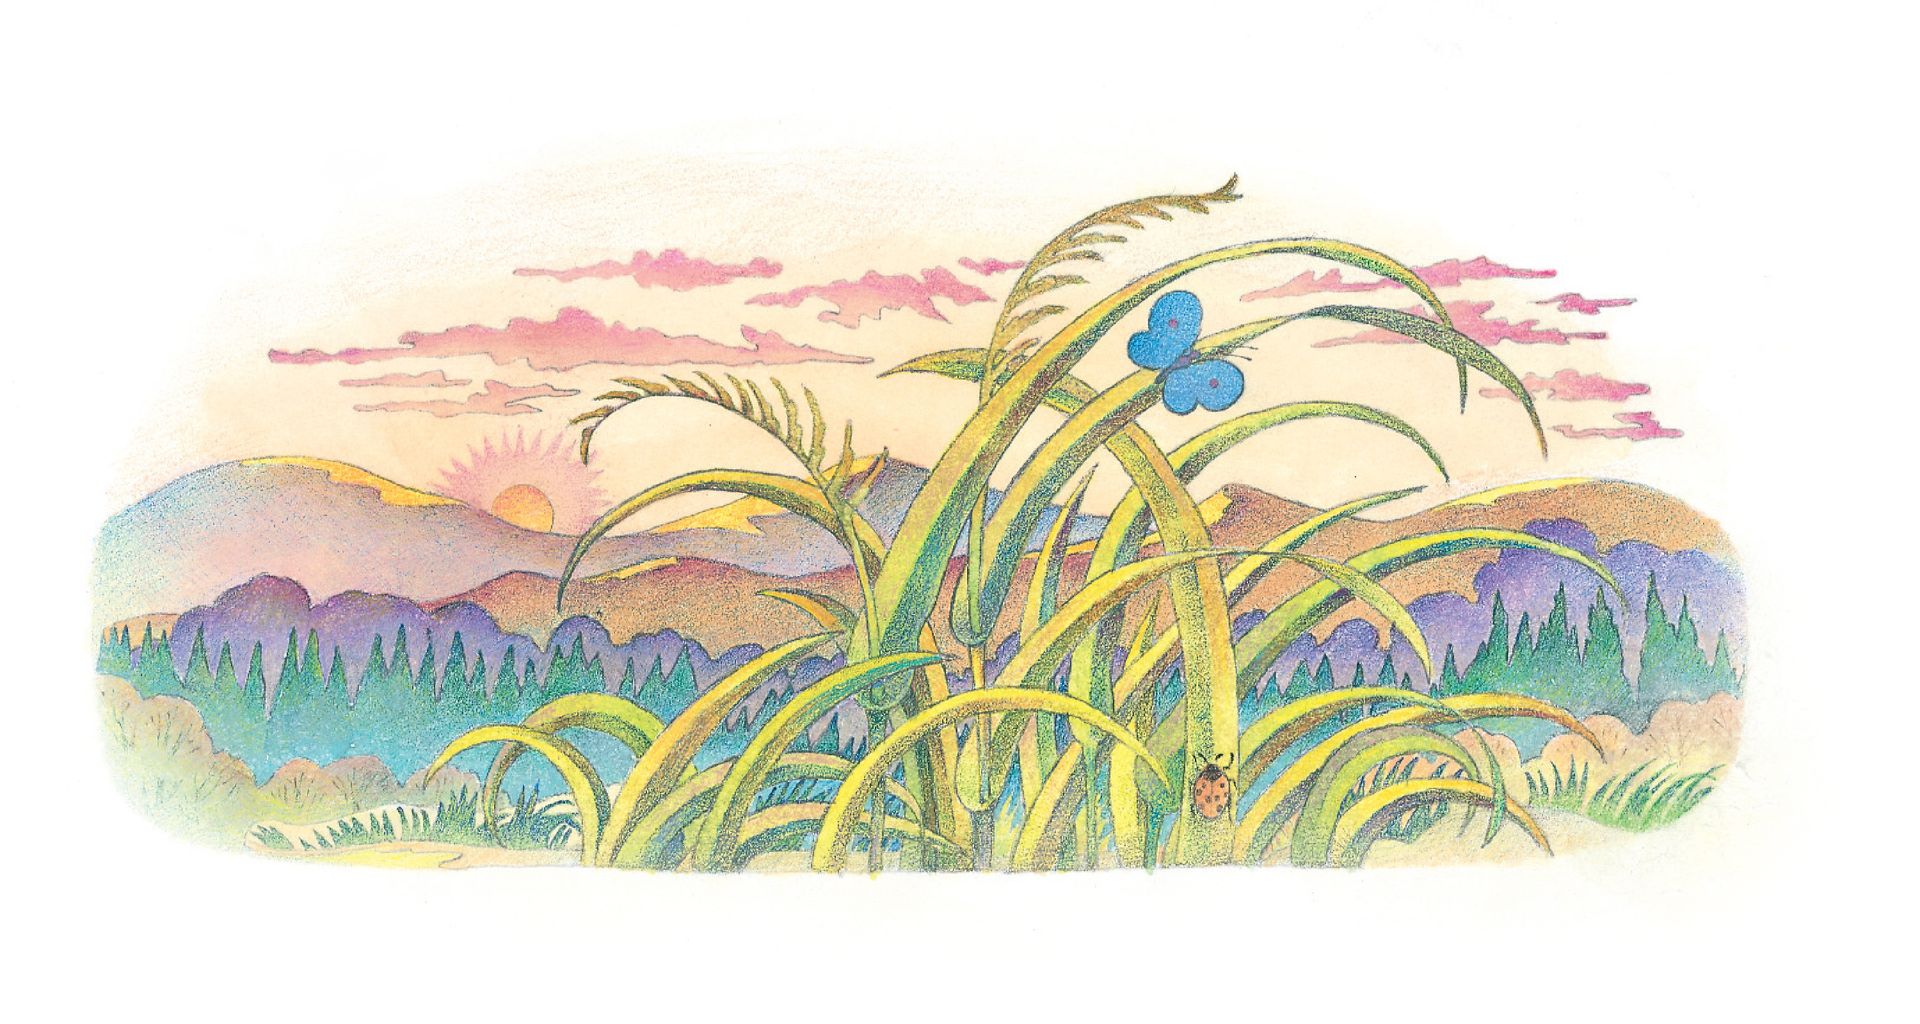 A small blue butterfly landing on a long blade of grass. From the Children’s Songbook, page 295, “O Rest in the Lord”; watercolor illustration by Richard Hull.